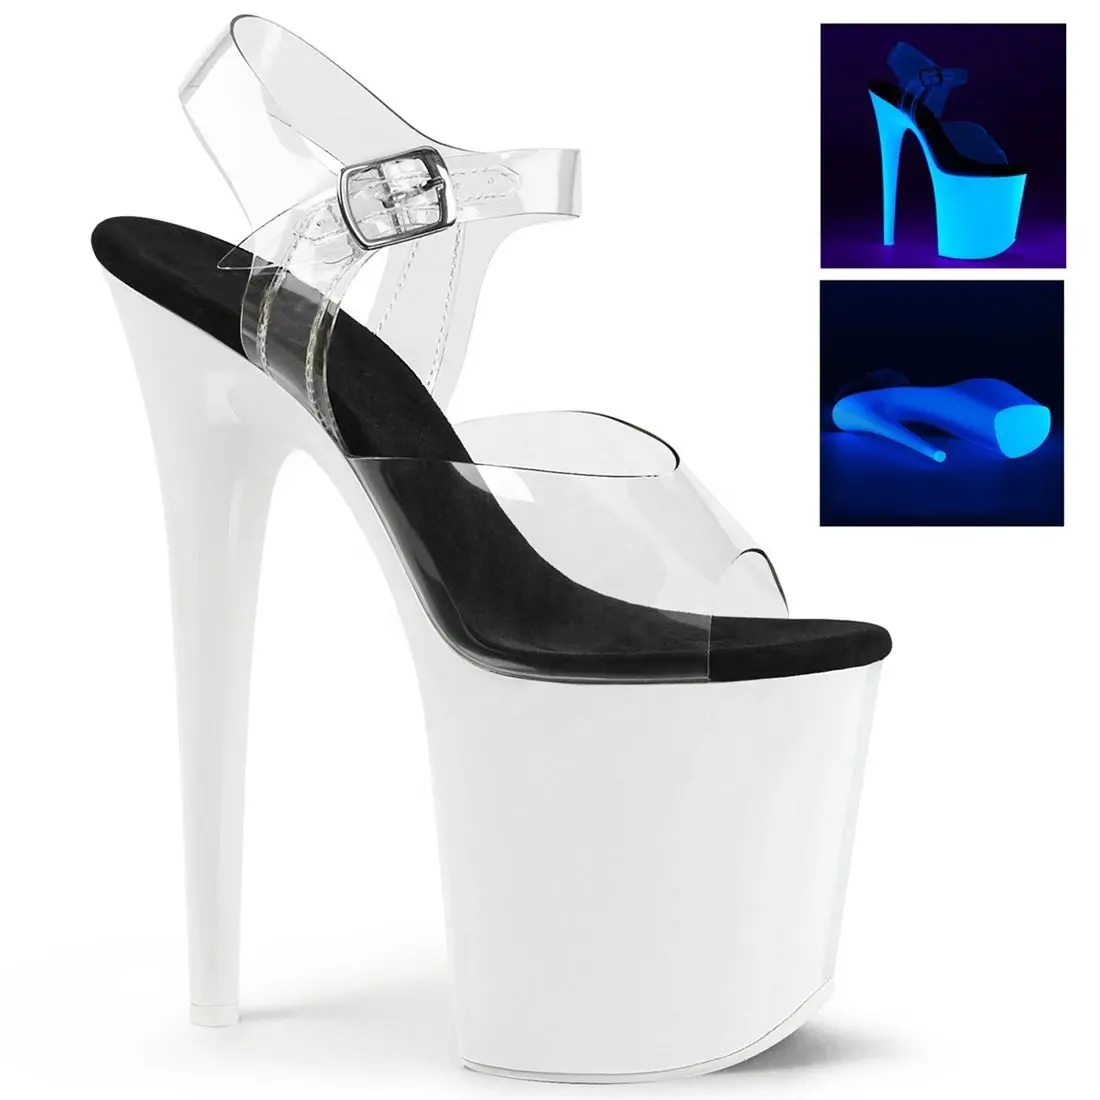 20cm super high heels pole dancing shoes thin heel white waterproof platform dress sandals peep-toe shallow mouth party shoes